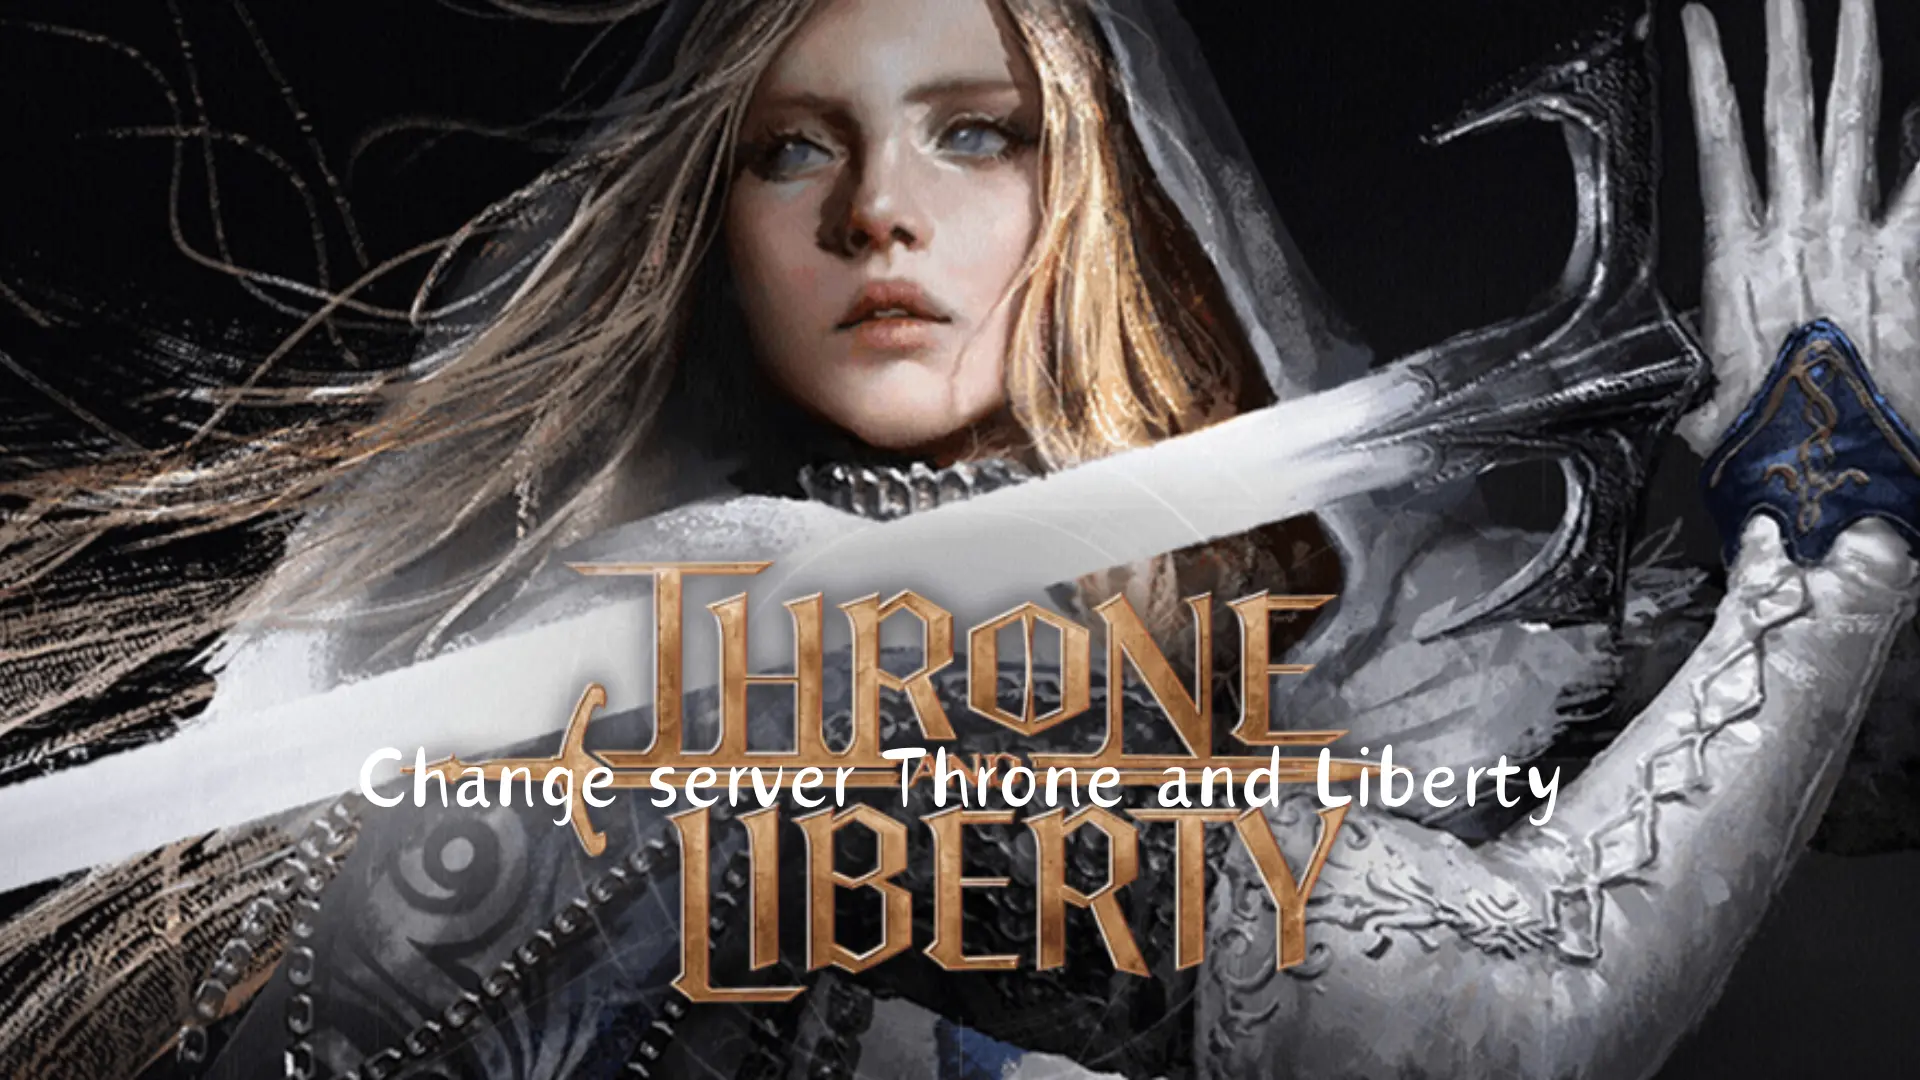 Throne and Liberty Release Date: 12/07/2023 in Korea - Throne and